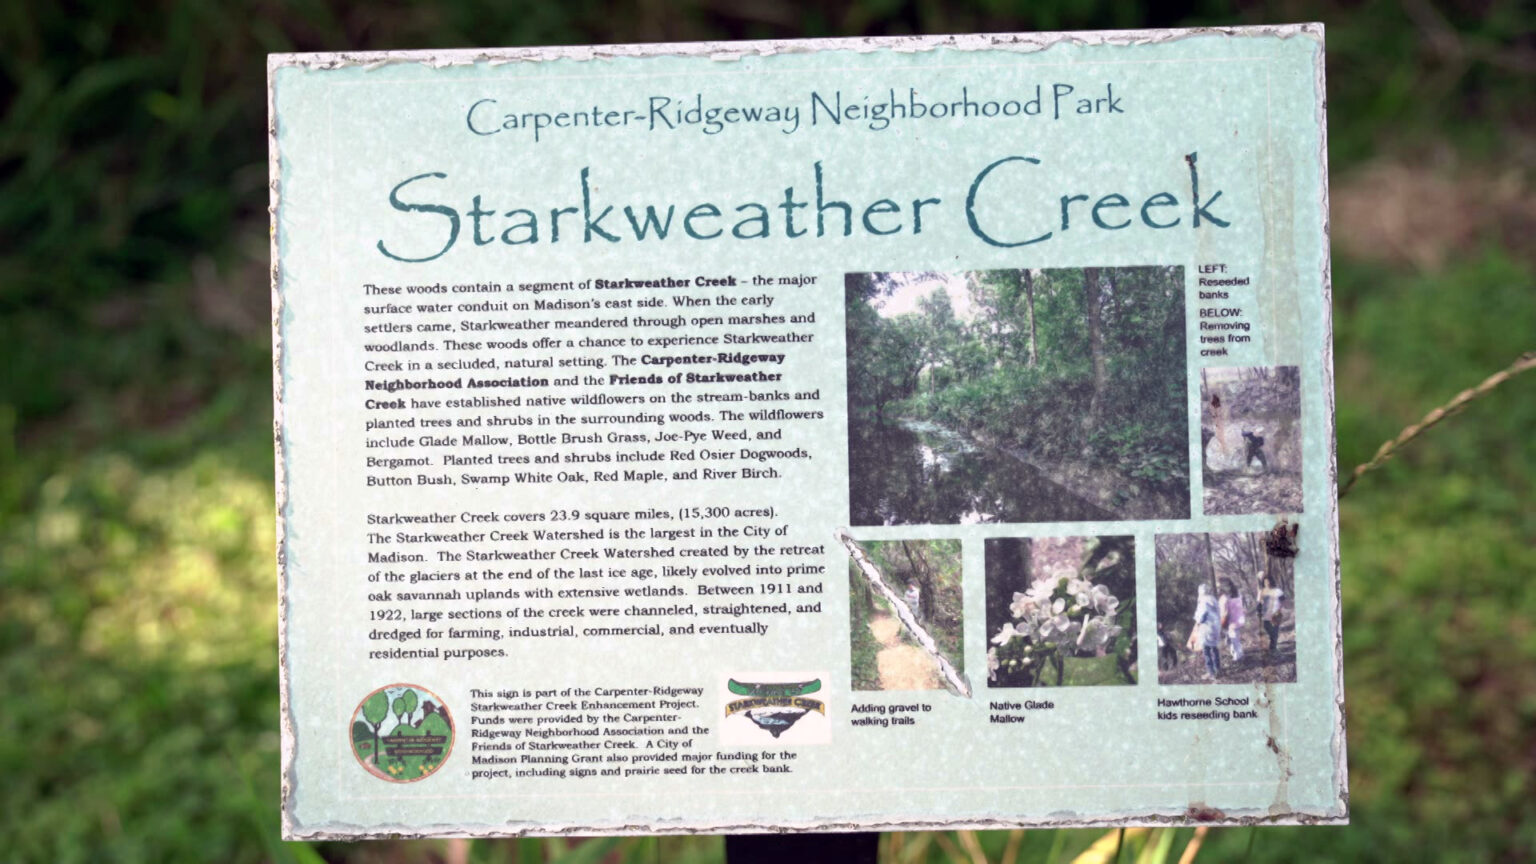 An interpretive sign with the titles Carpenter-Ridgeway Neighborhood Park and Starkweather Creek displays photos and explanatory text about the two geographic features, with foliage in the background.